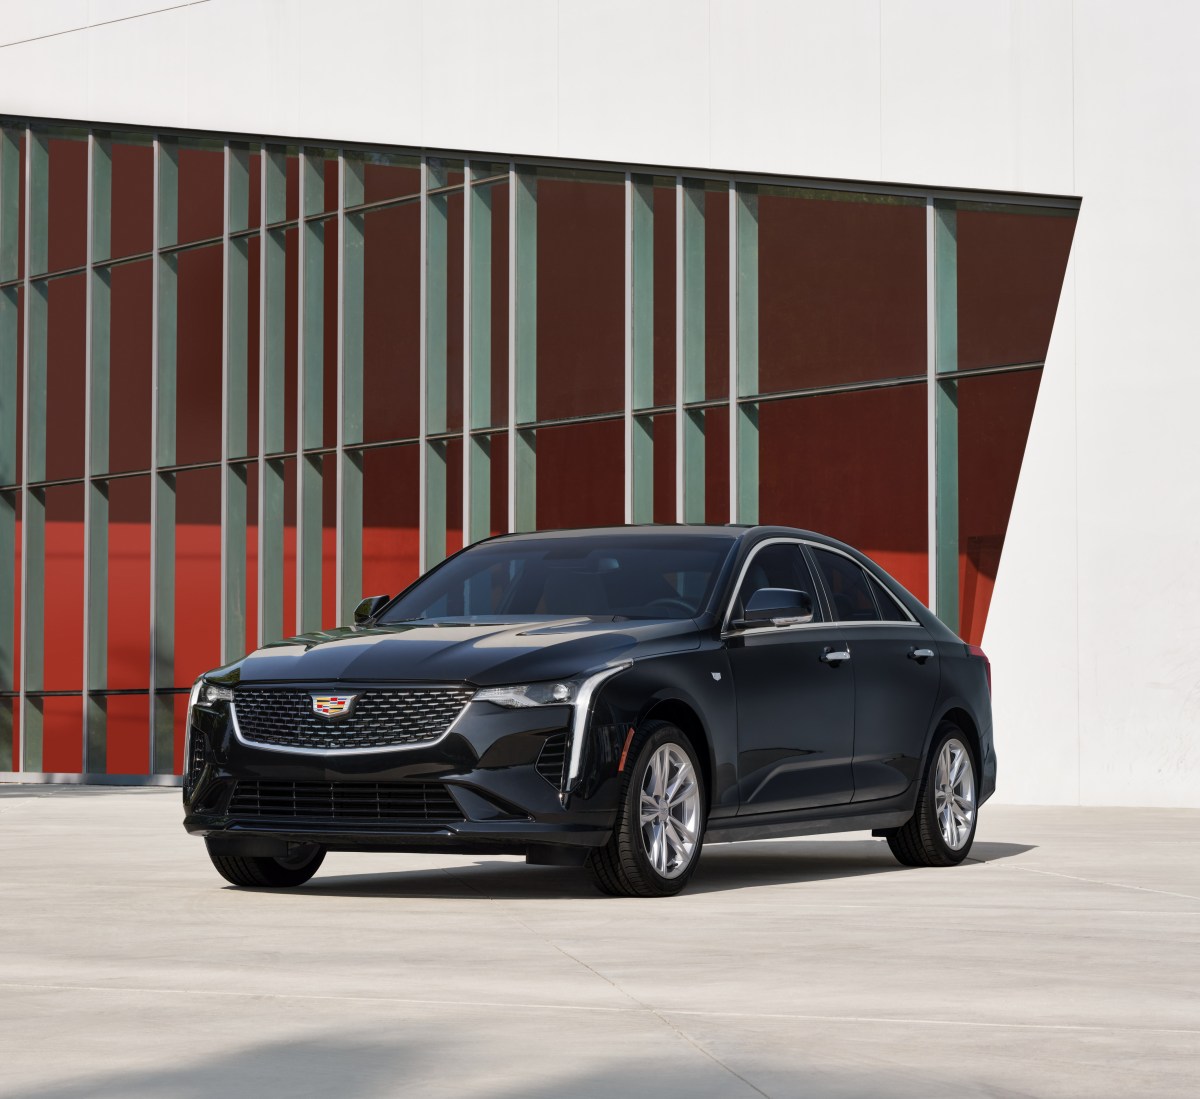 A 3/4 front view of a black 2021 Cadillac CT4 sedan parked in front of a red and white building.